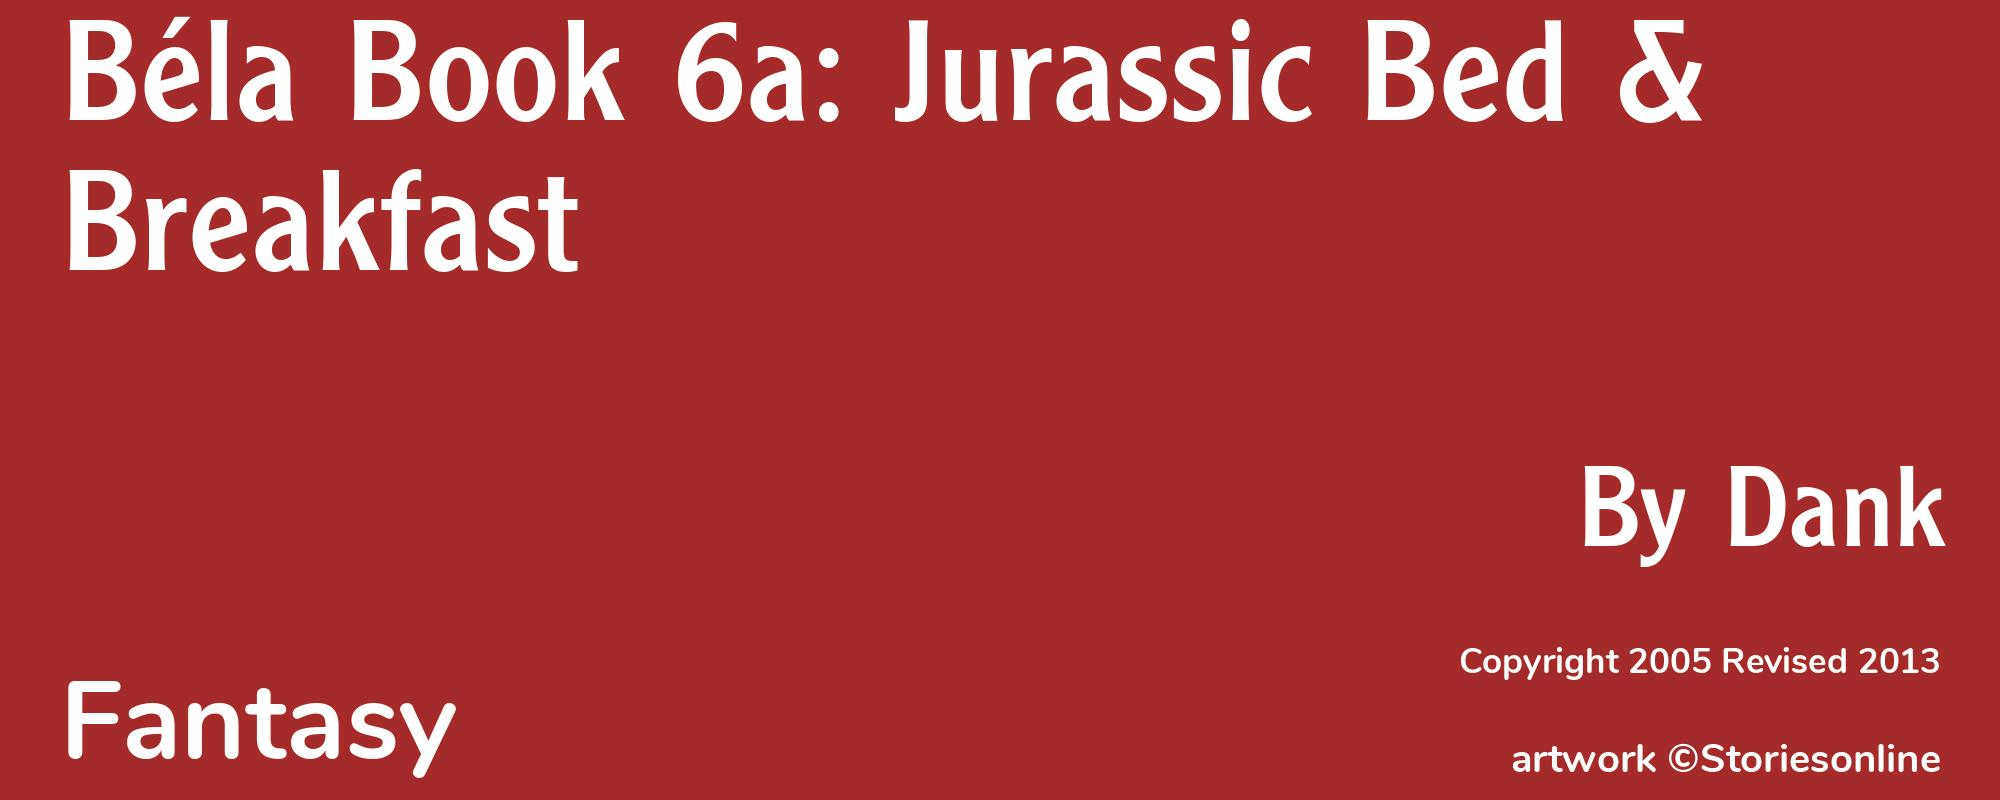 Béla Book 6a: Jurassic Bed & Breakfast - Cover